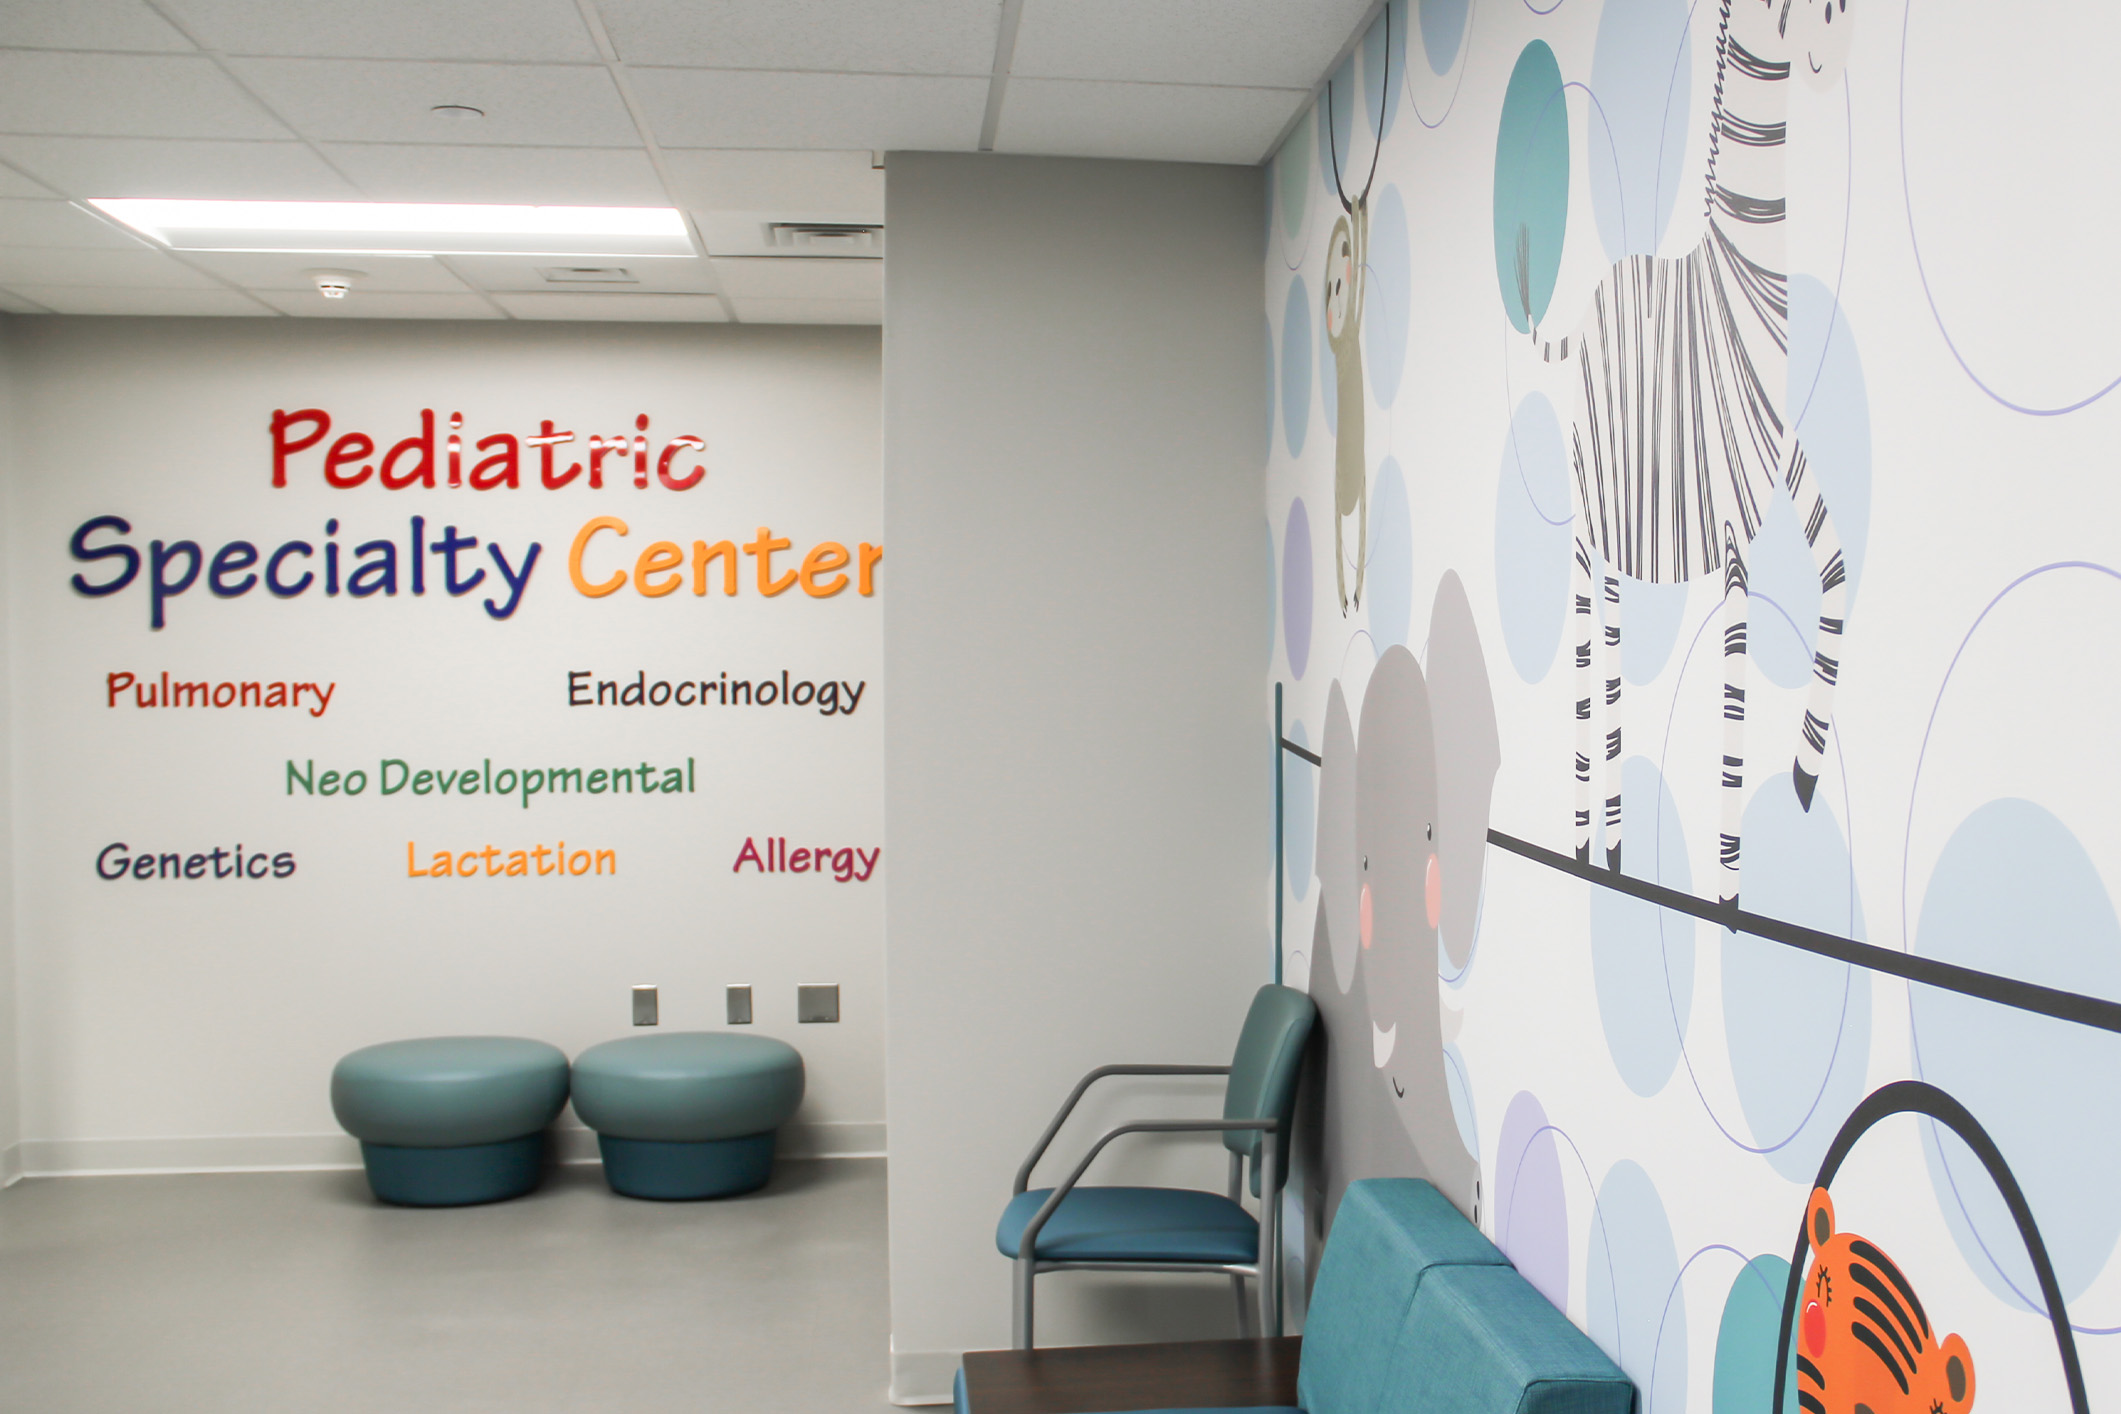 Children's Pediatric Speciality unit with baby animal wall artwork and murals